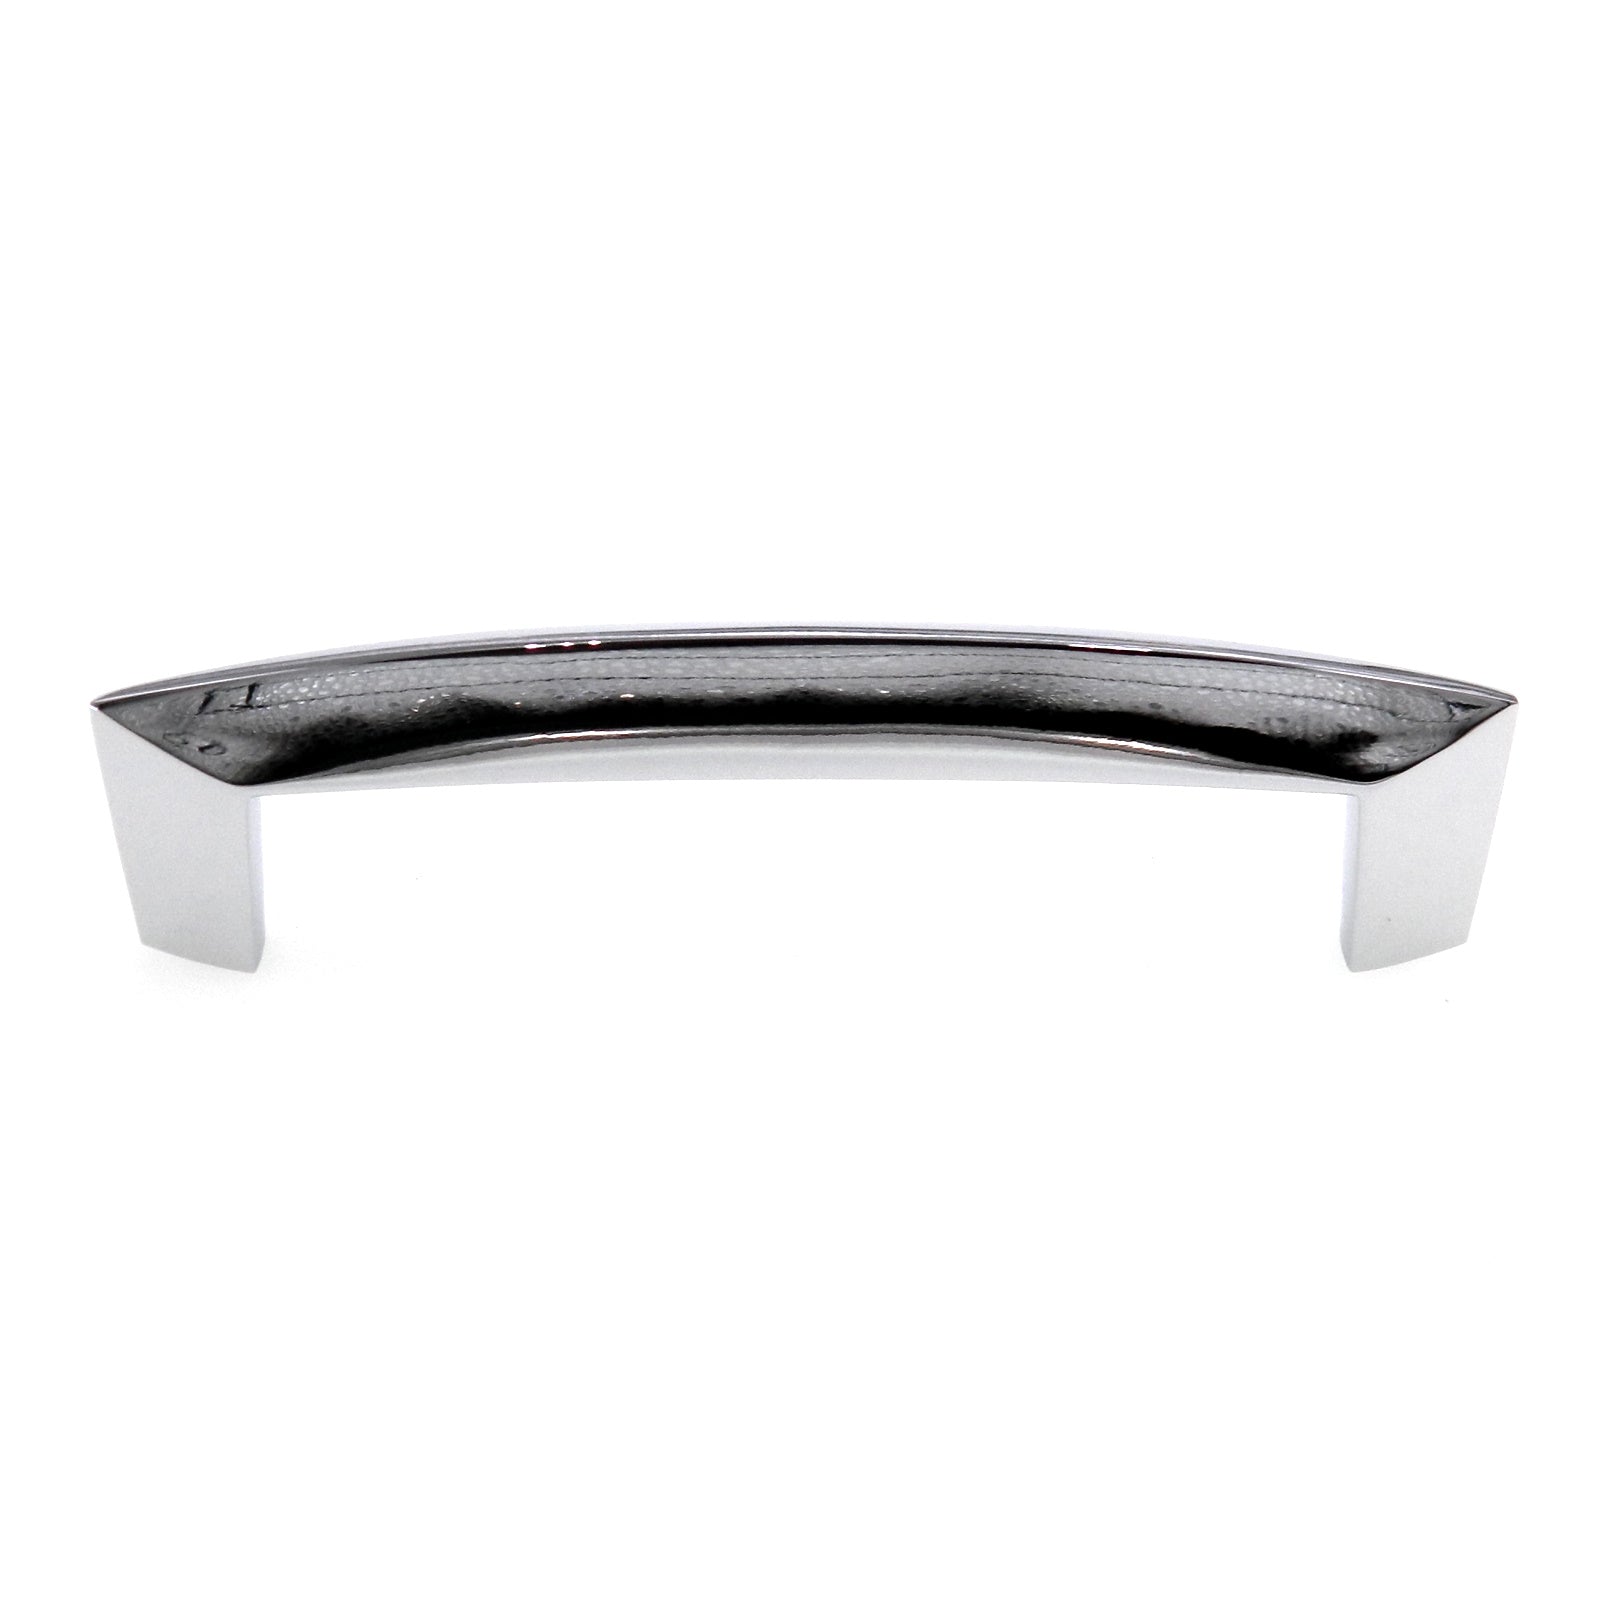 Amerock Creased Bow Polished Chrome 3 3/4" (96mm) Ctr. Cabinet Handle BP27016-26